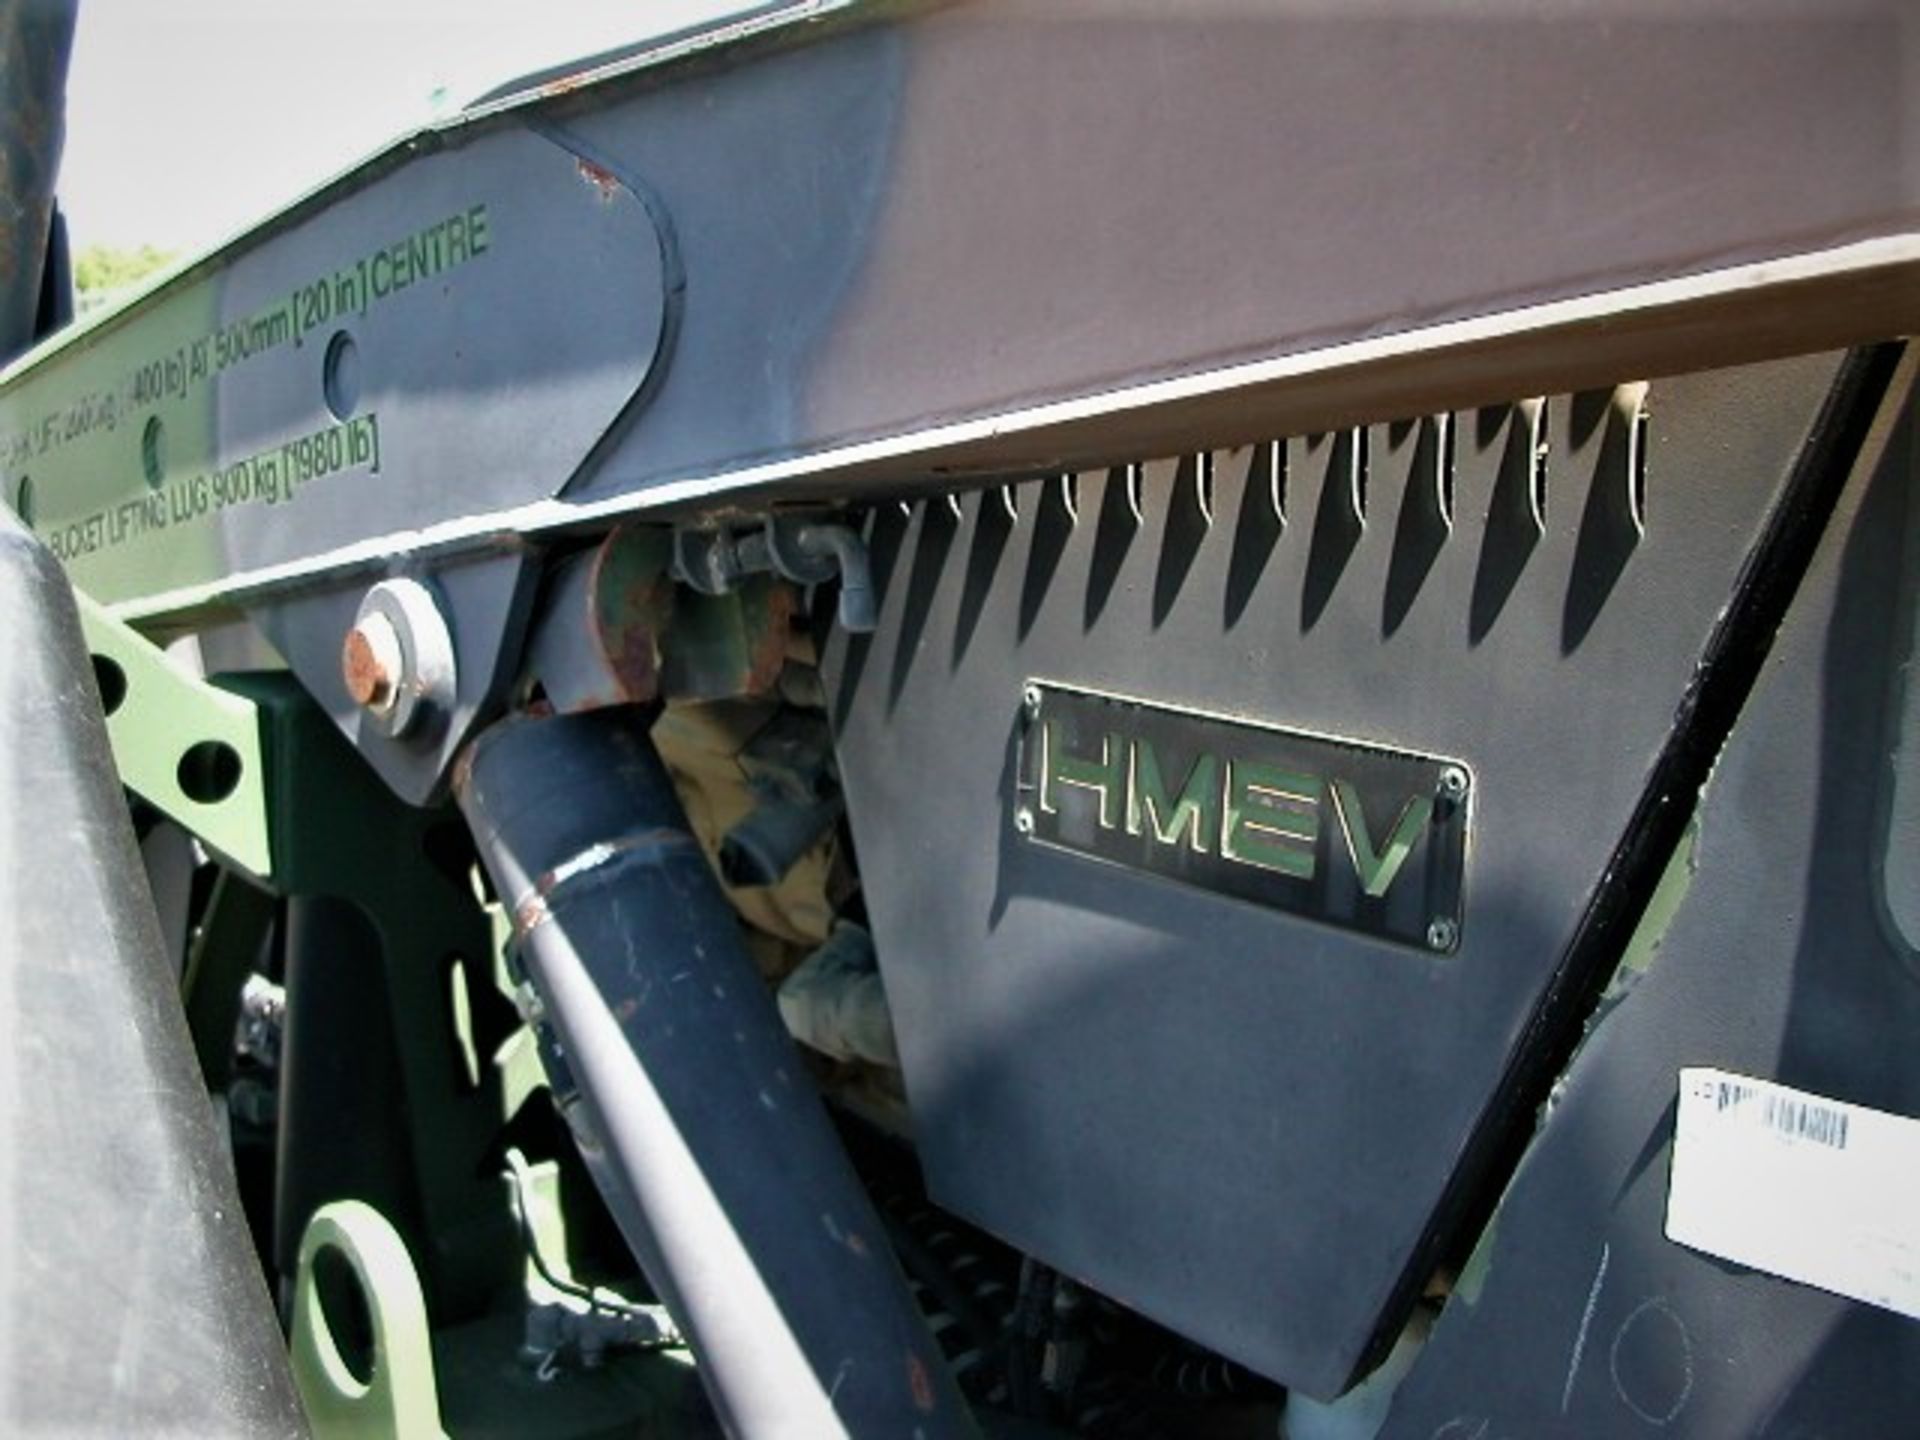 IHMEE - Military High Mobility Engineering Vehicle/Excavator - (3124 Miles) - Excellent Condition! - Image 13 of 16